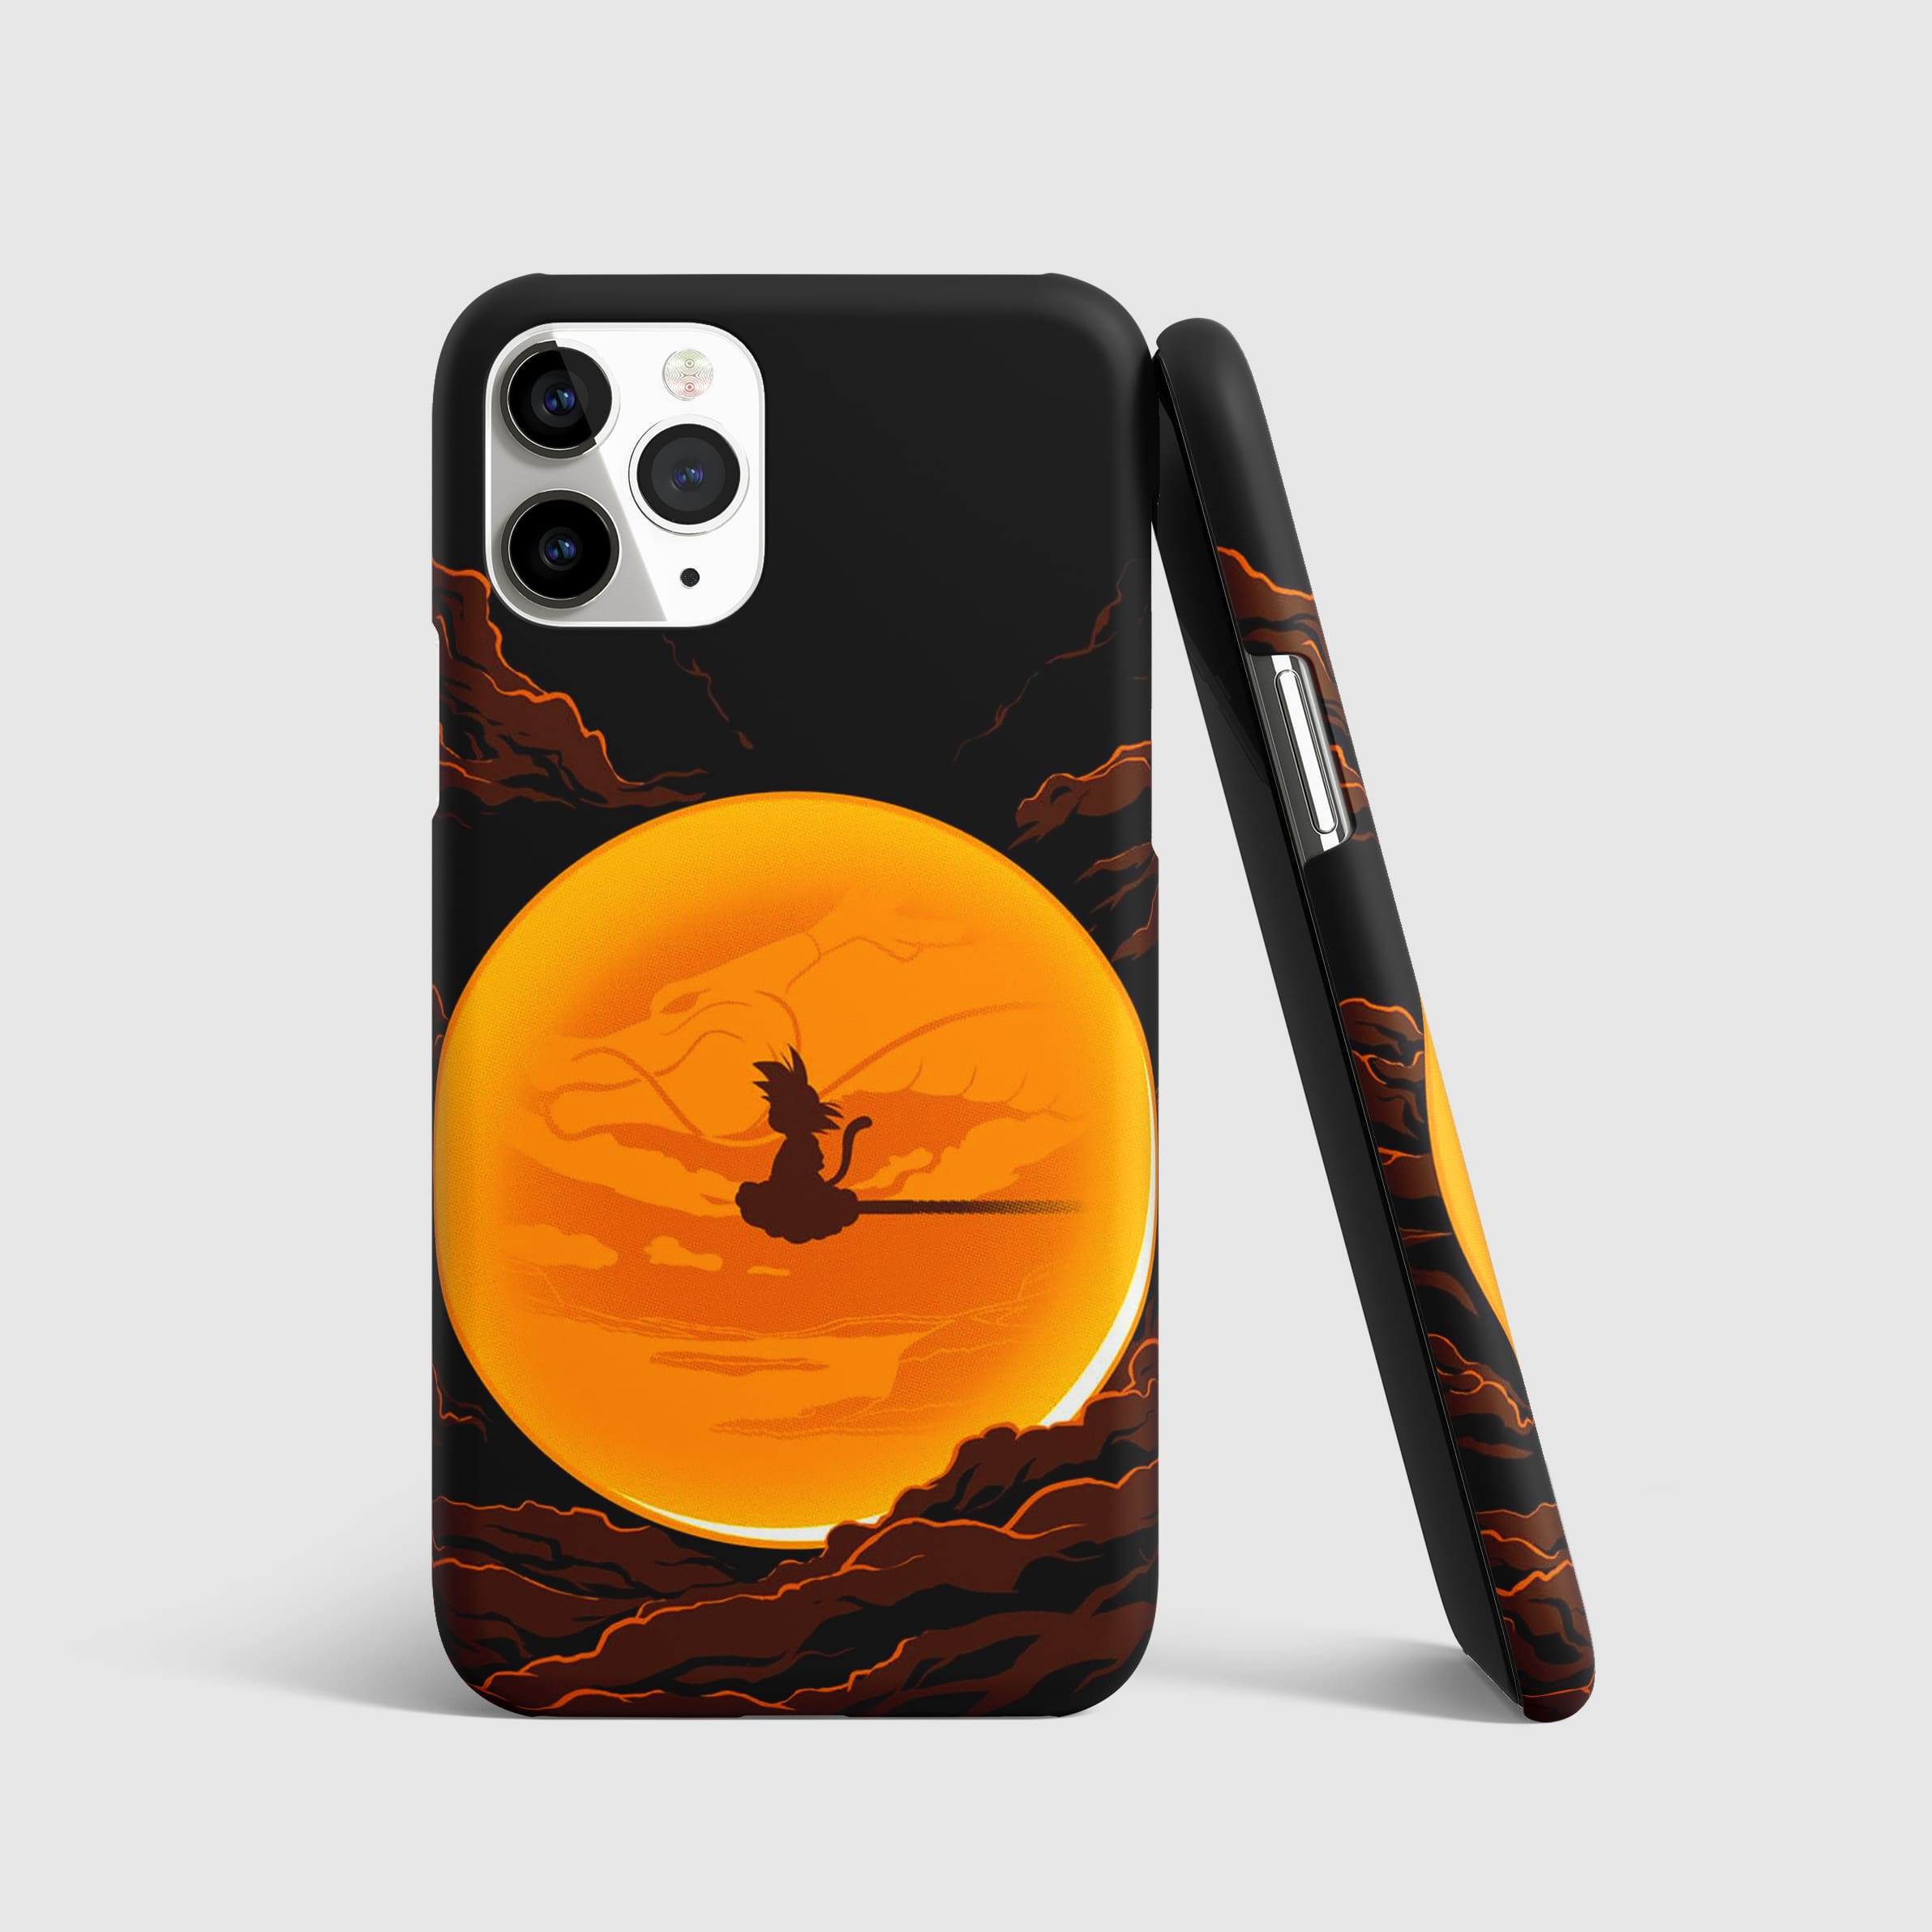 Gohan riding the Nimbus cloud on colorful phone cover.